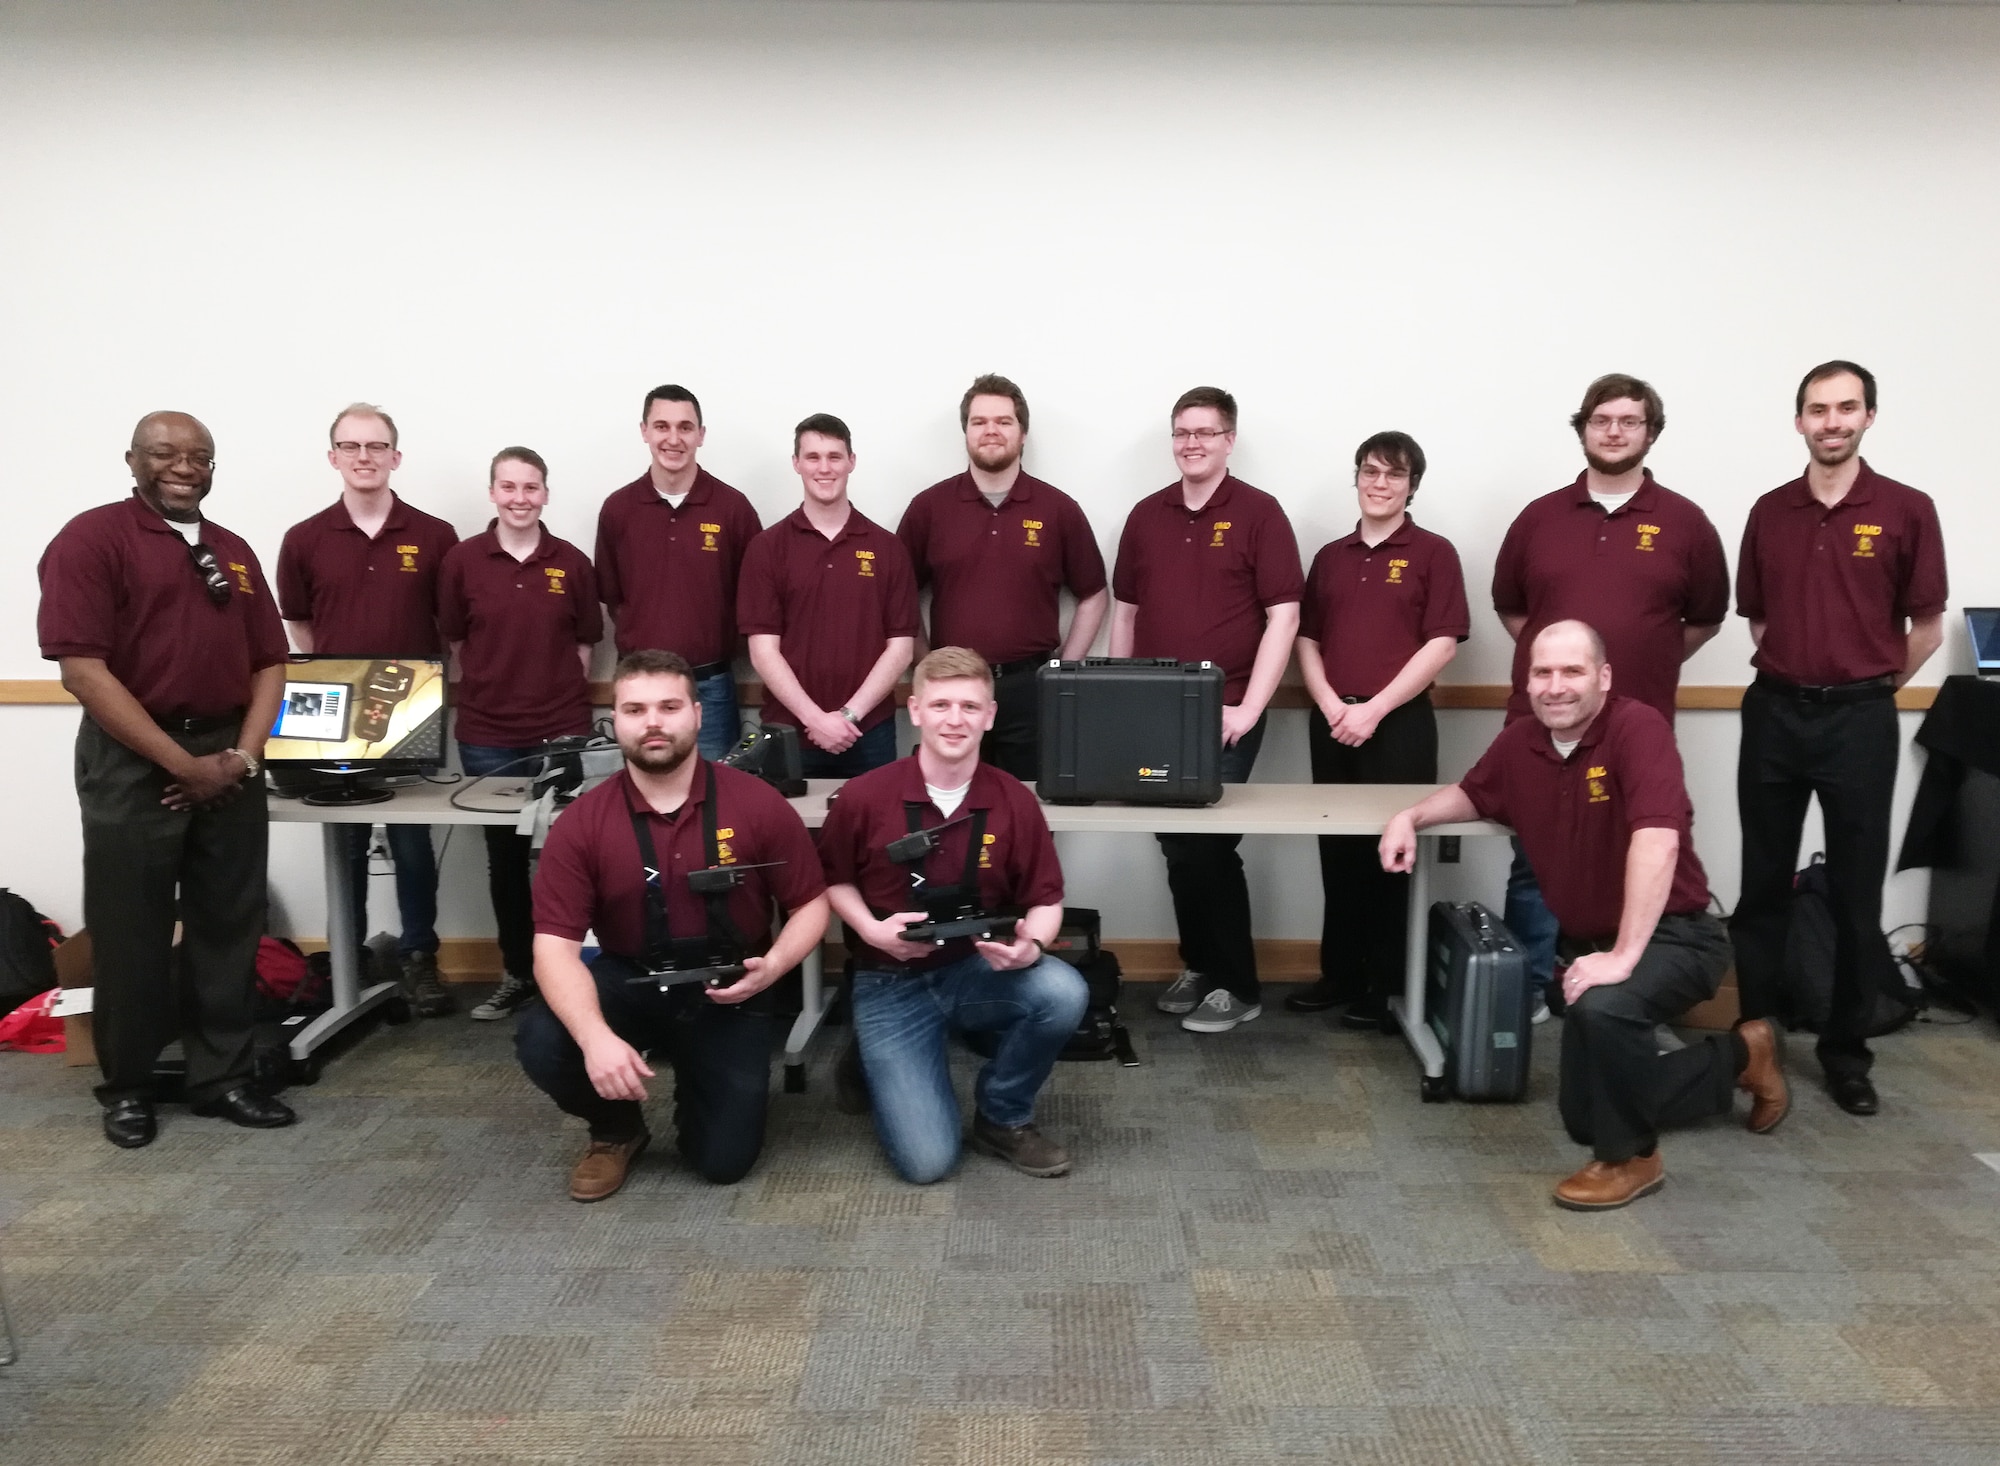 The Air Force Research Laboratory University and Service Academy Challenges harness the talents of students and cadets to develop real-world solutions to complex problems. This year’s winning University Challenge team from the University of Minnesota Duluth used technologies including Doppler radar to locate and identify hidden people. (Courtesy photo)